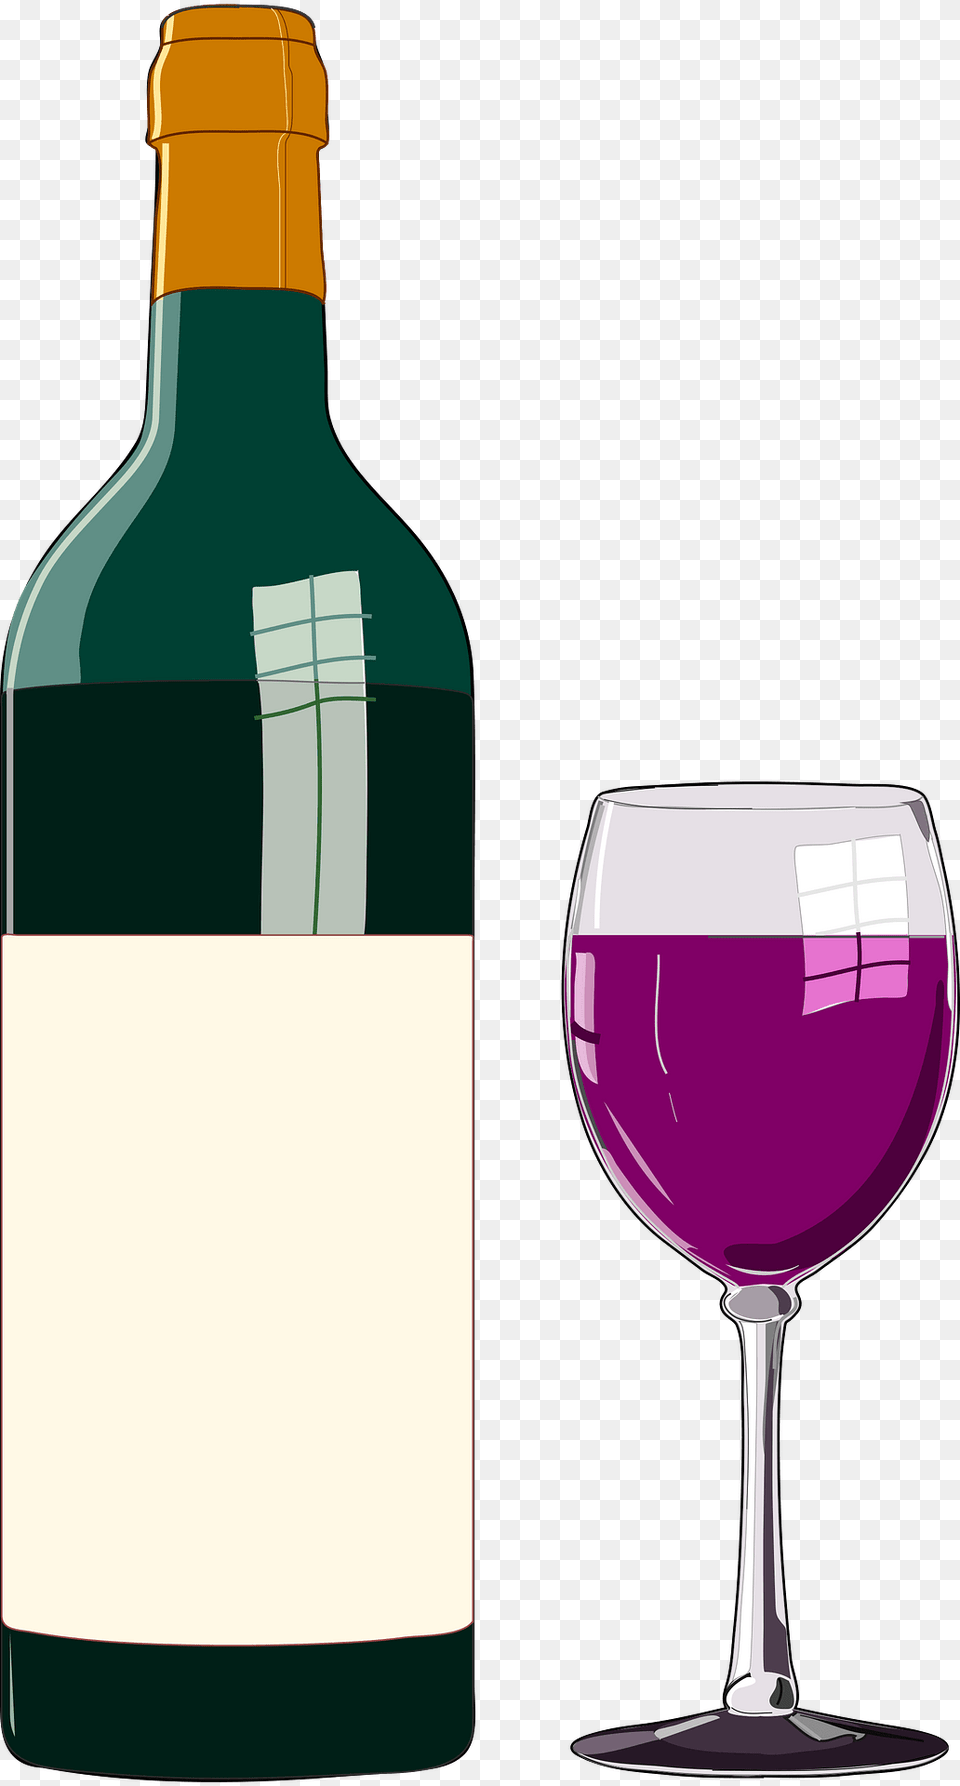 Wine Bottle And Wine Glass Clipart, Alcohol, Beverage, Liquor, Wine Bottle Free Transparent Png